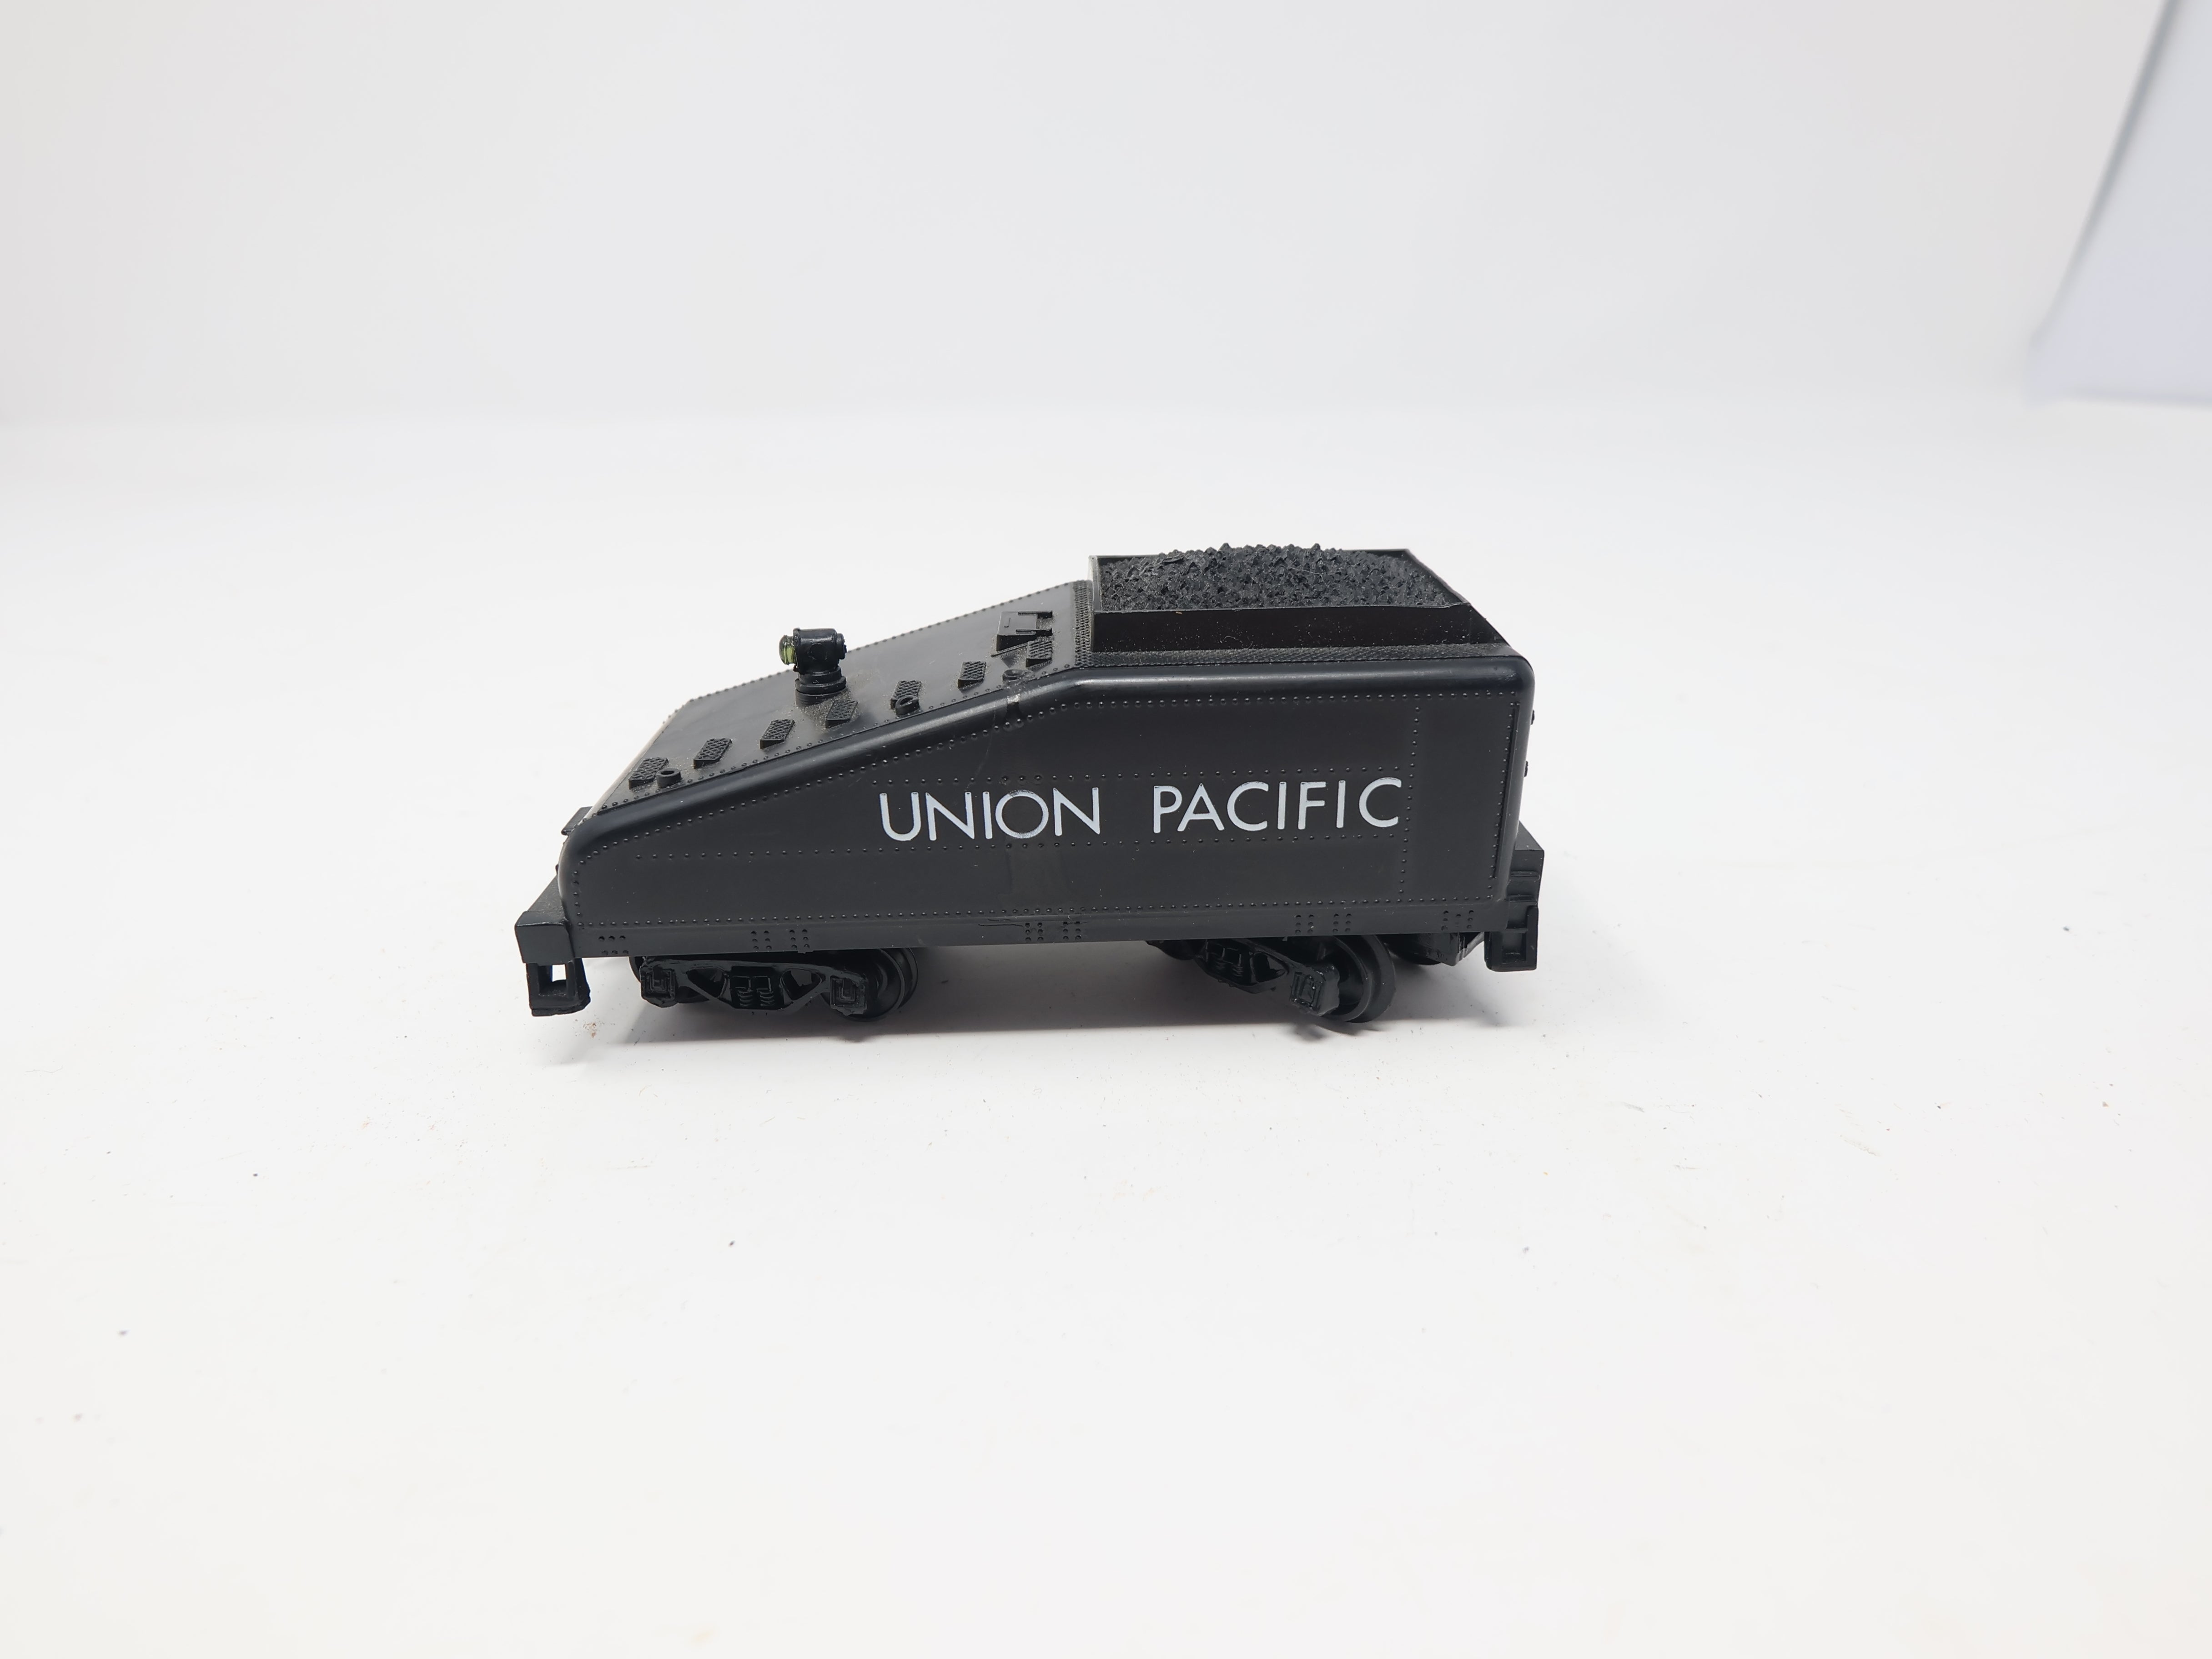 USED Playart HO Scale, Tender Only, Union Pacific